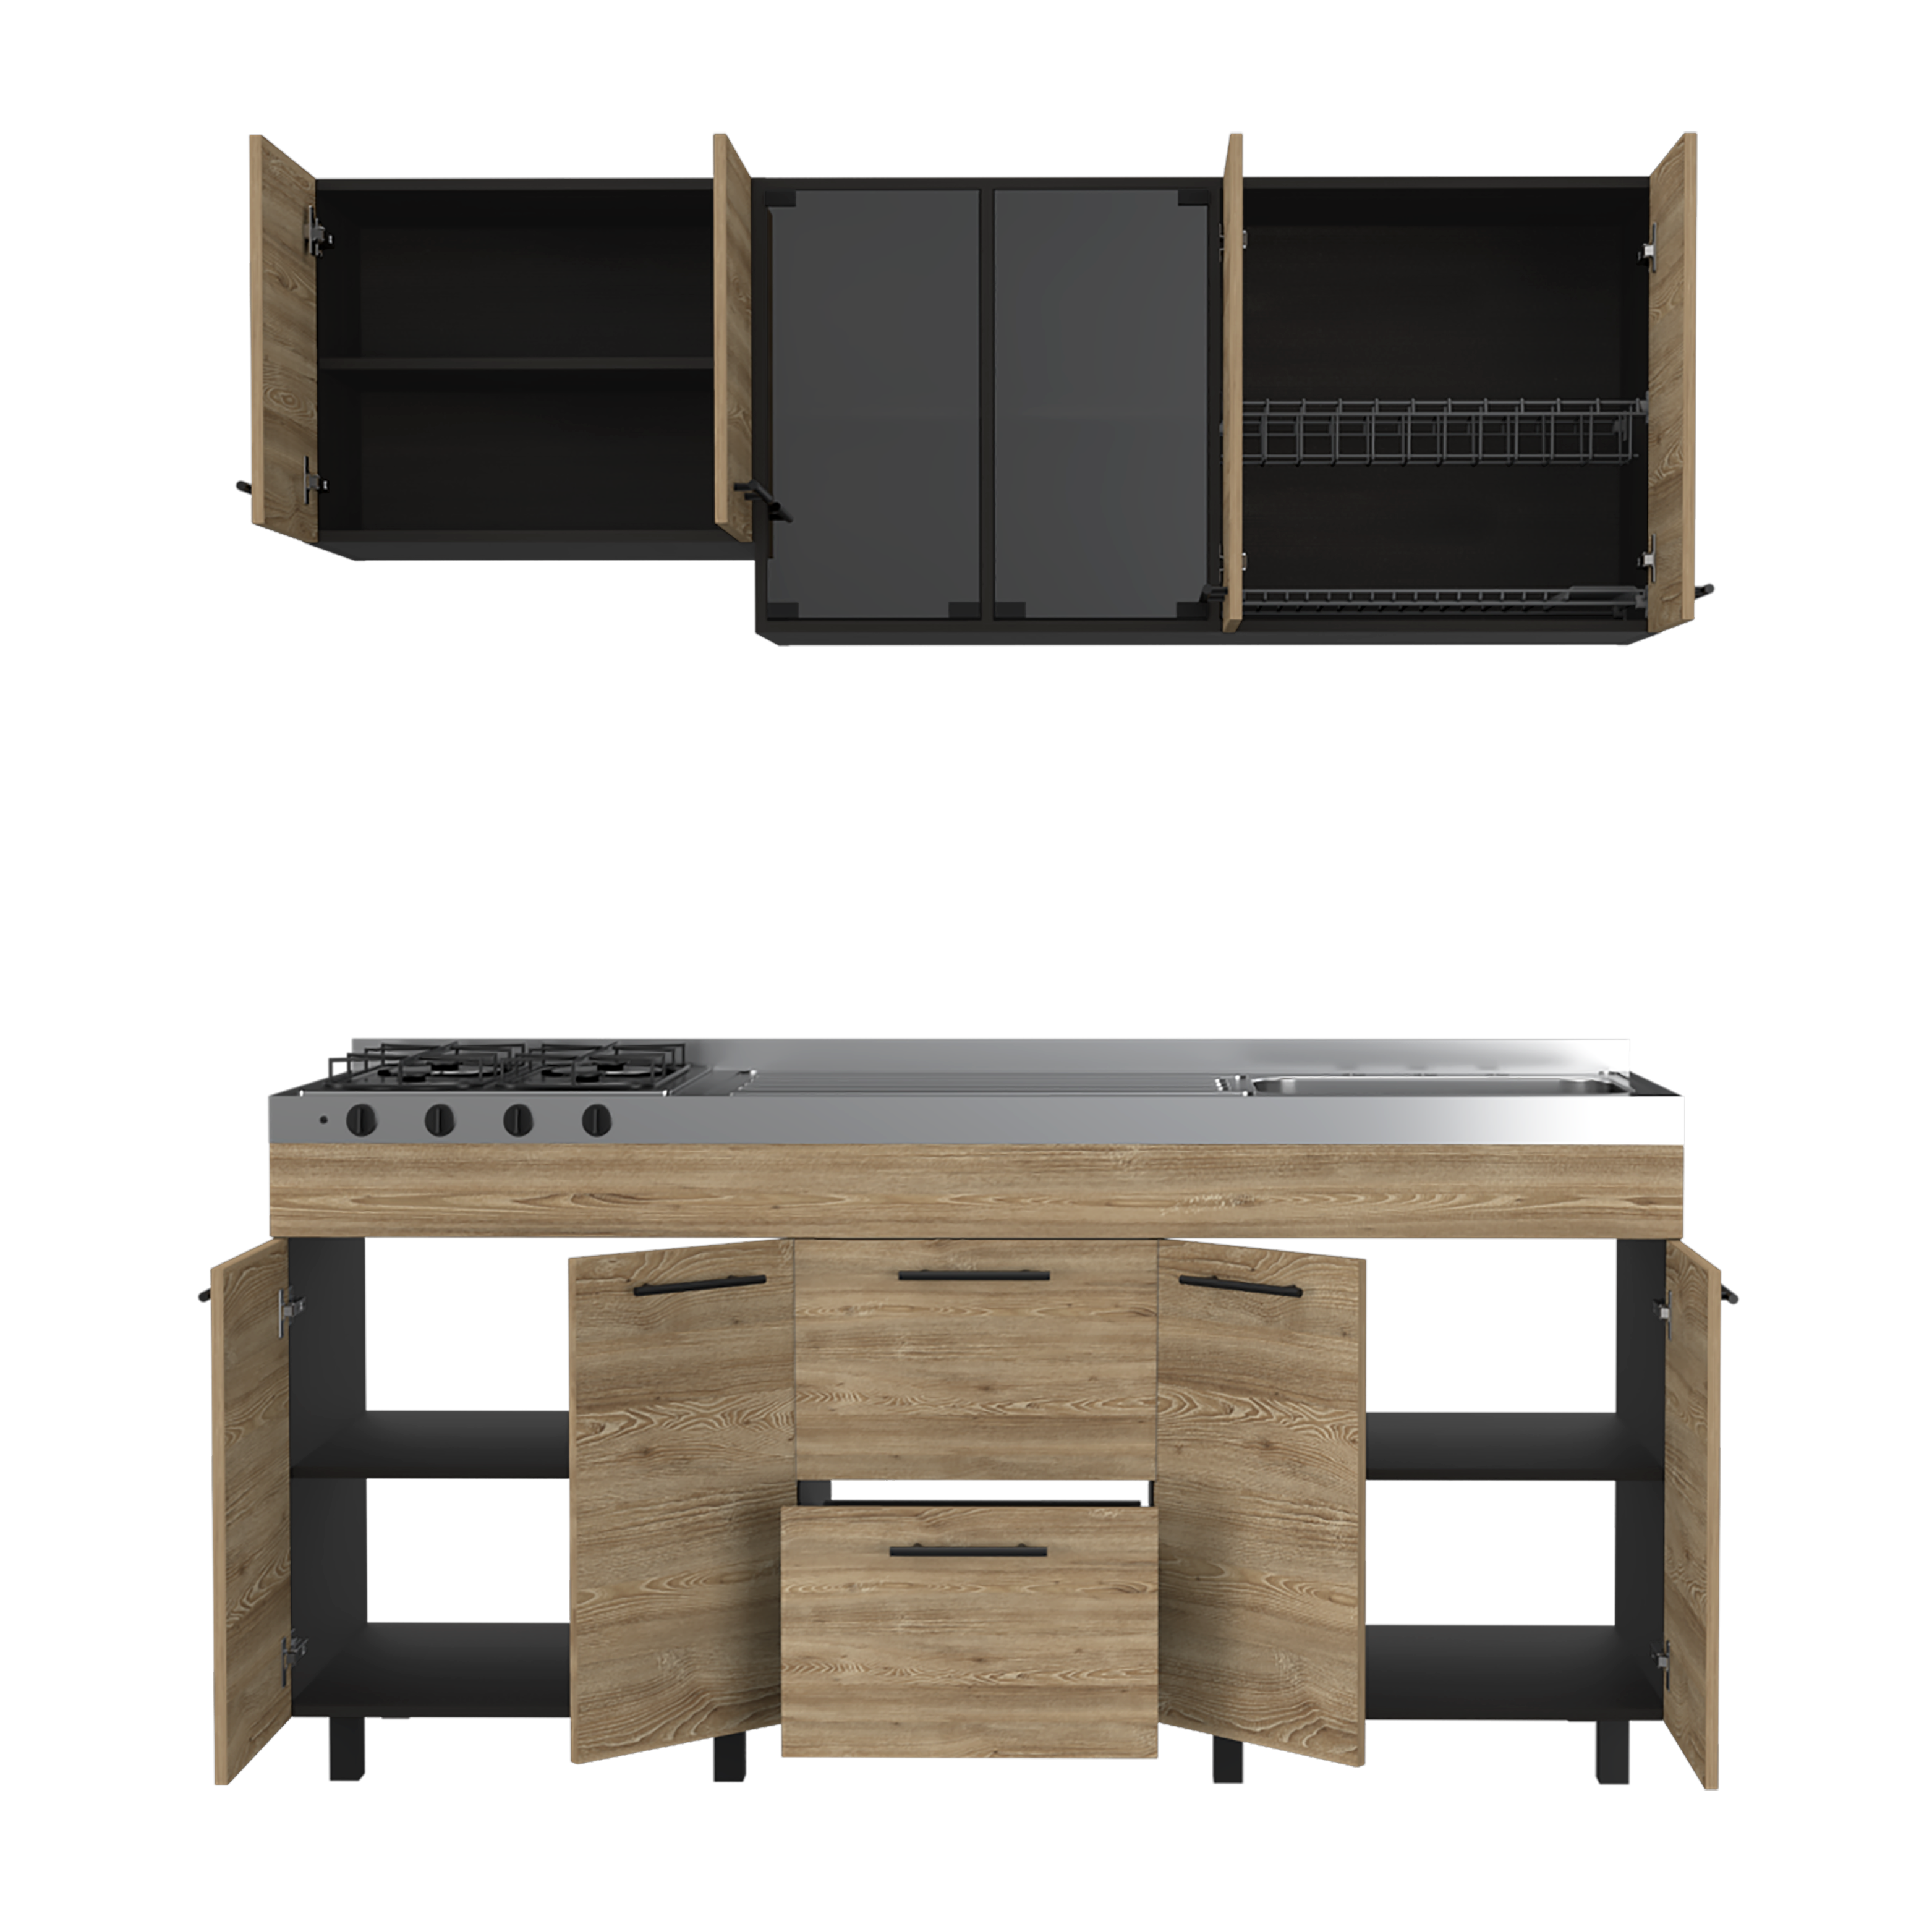 Luna Integral Kitchen, Includes Right Stainless Steel Countertop